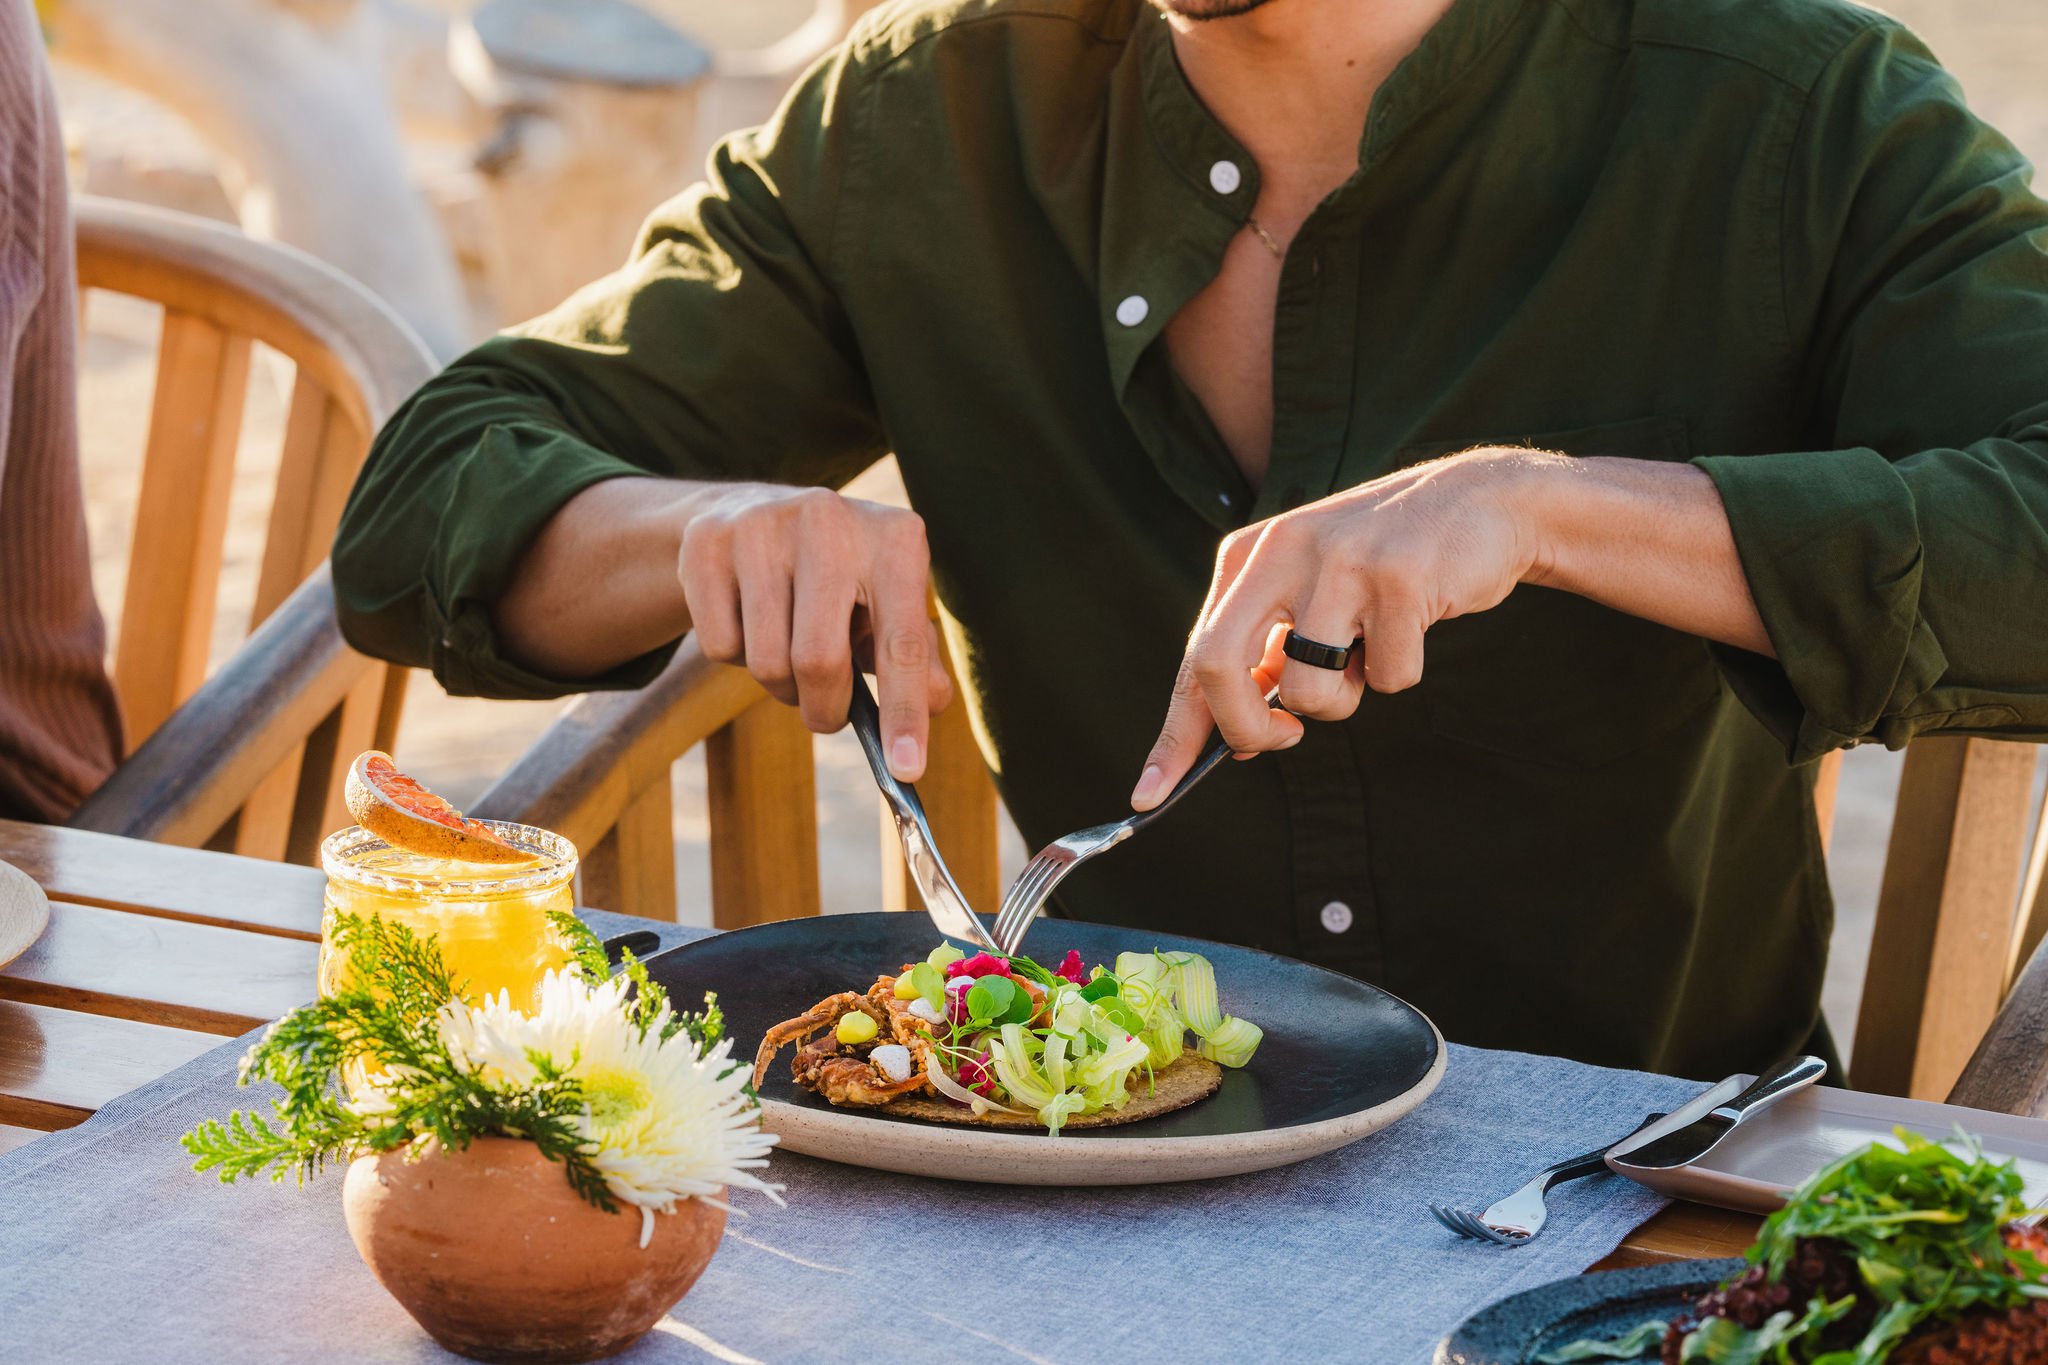 A man in a dark green shirt uses a knife and fork to cut breakfast.